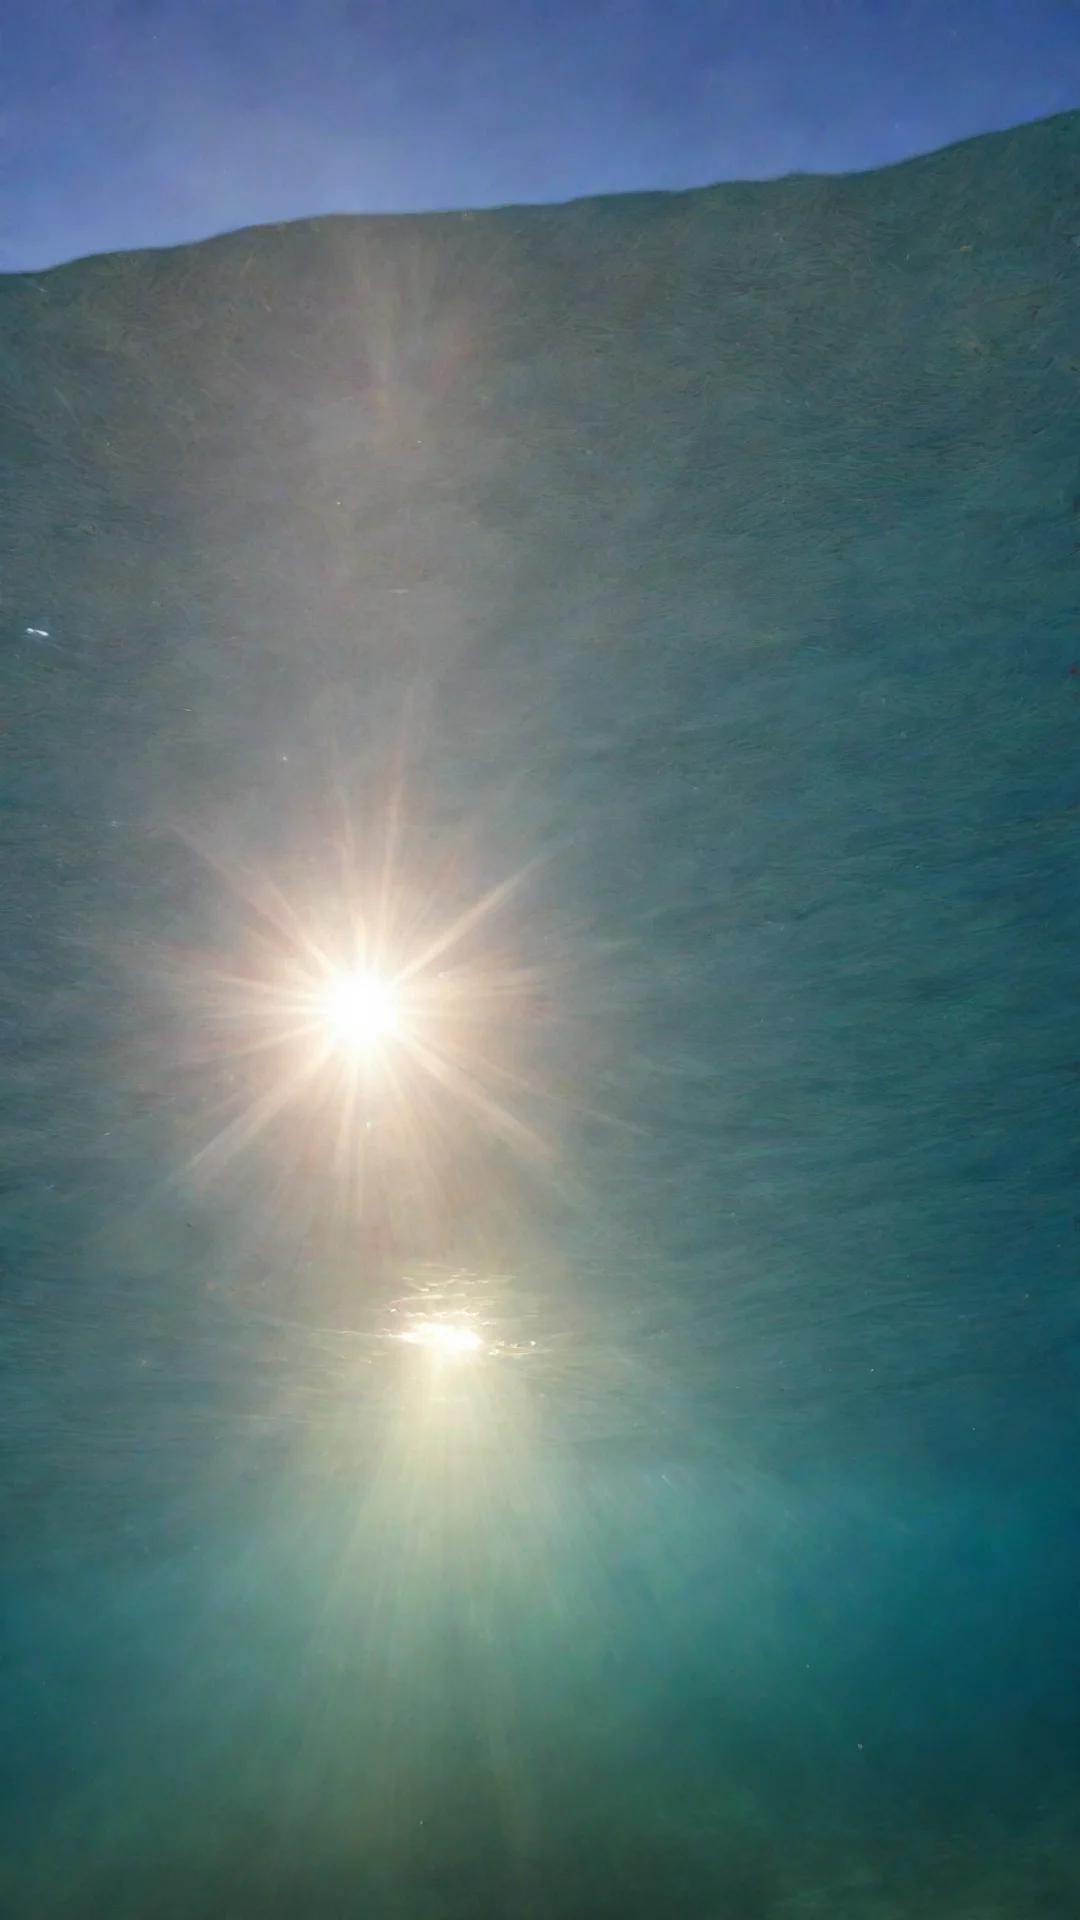 aiamazing half underwater sun awesome portrait 2 tall